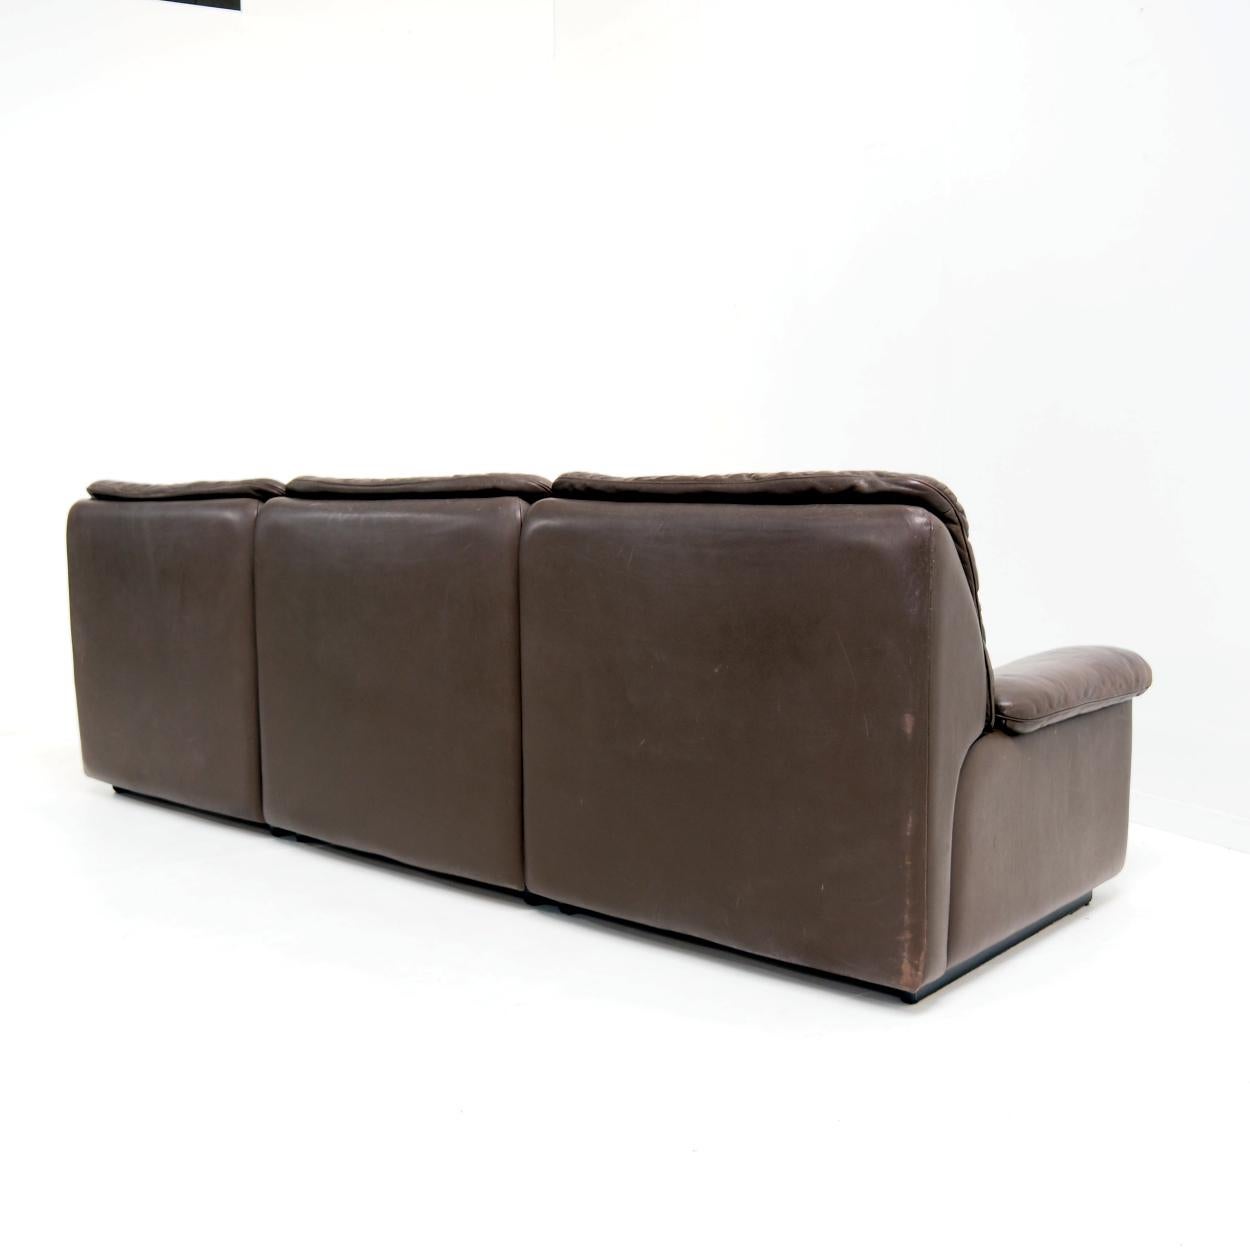 Leather Funky De Sede DS-66 Sofa with Nice Wear and Tear, 1970s For Sale